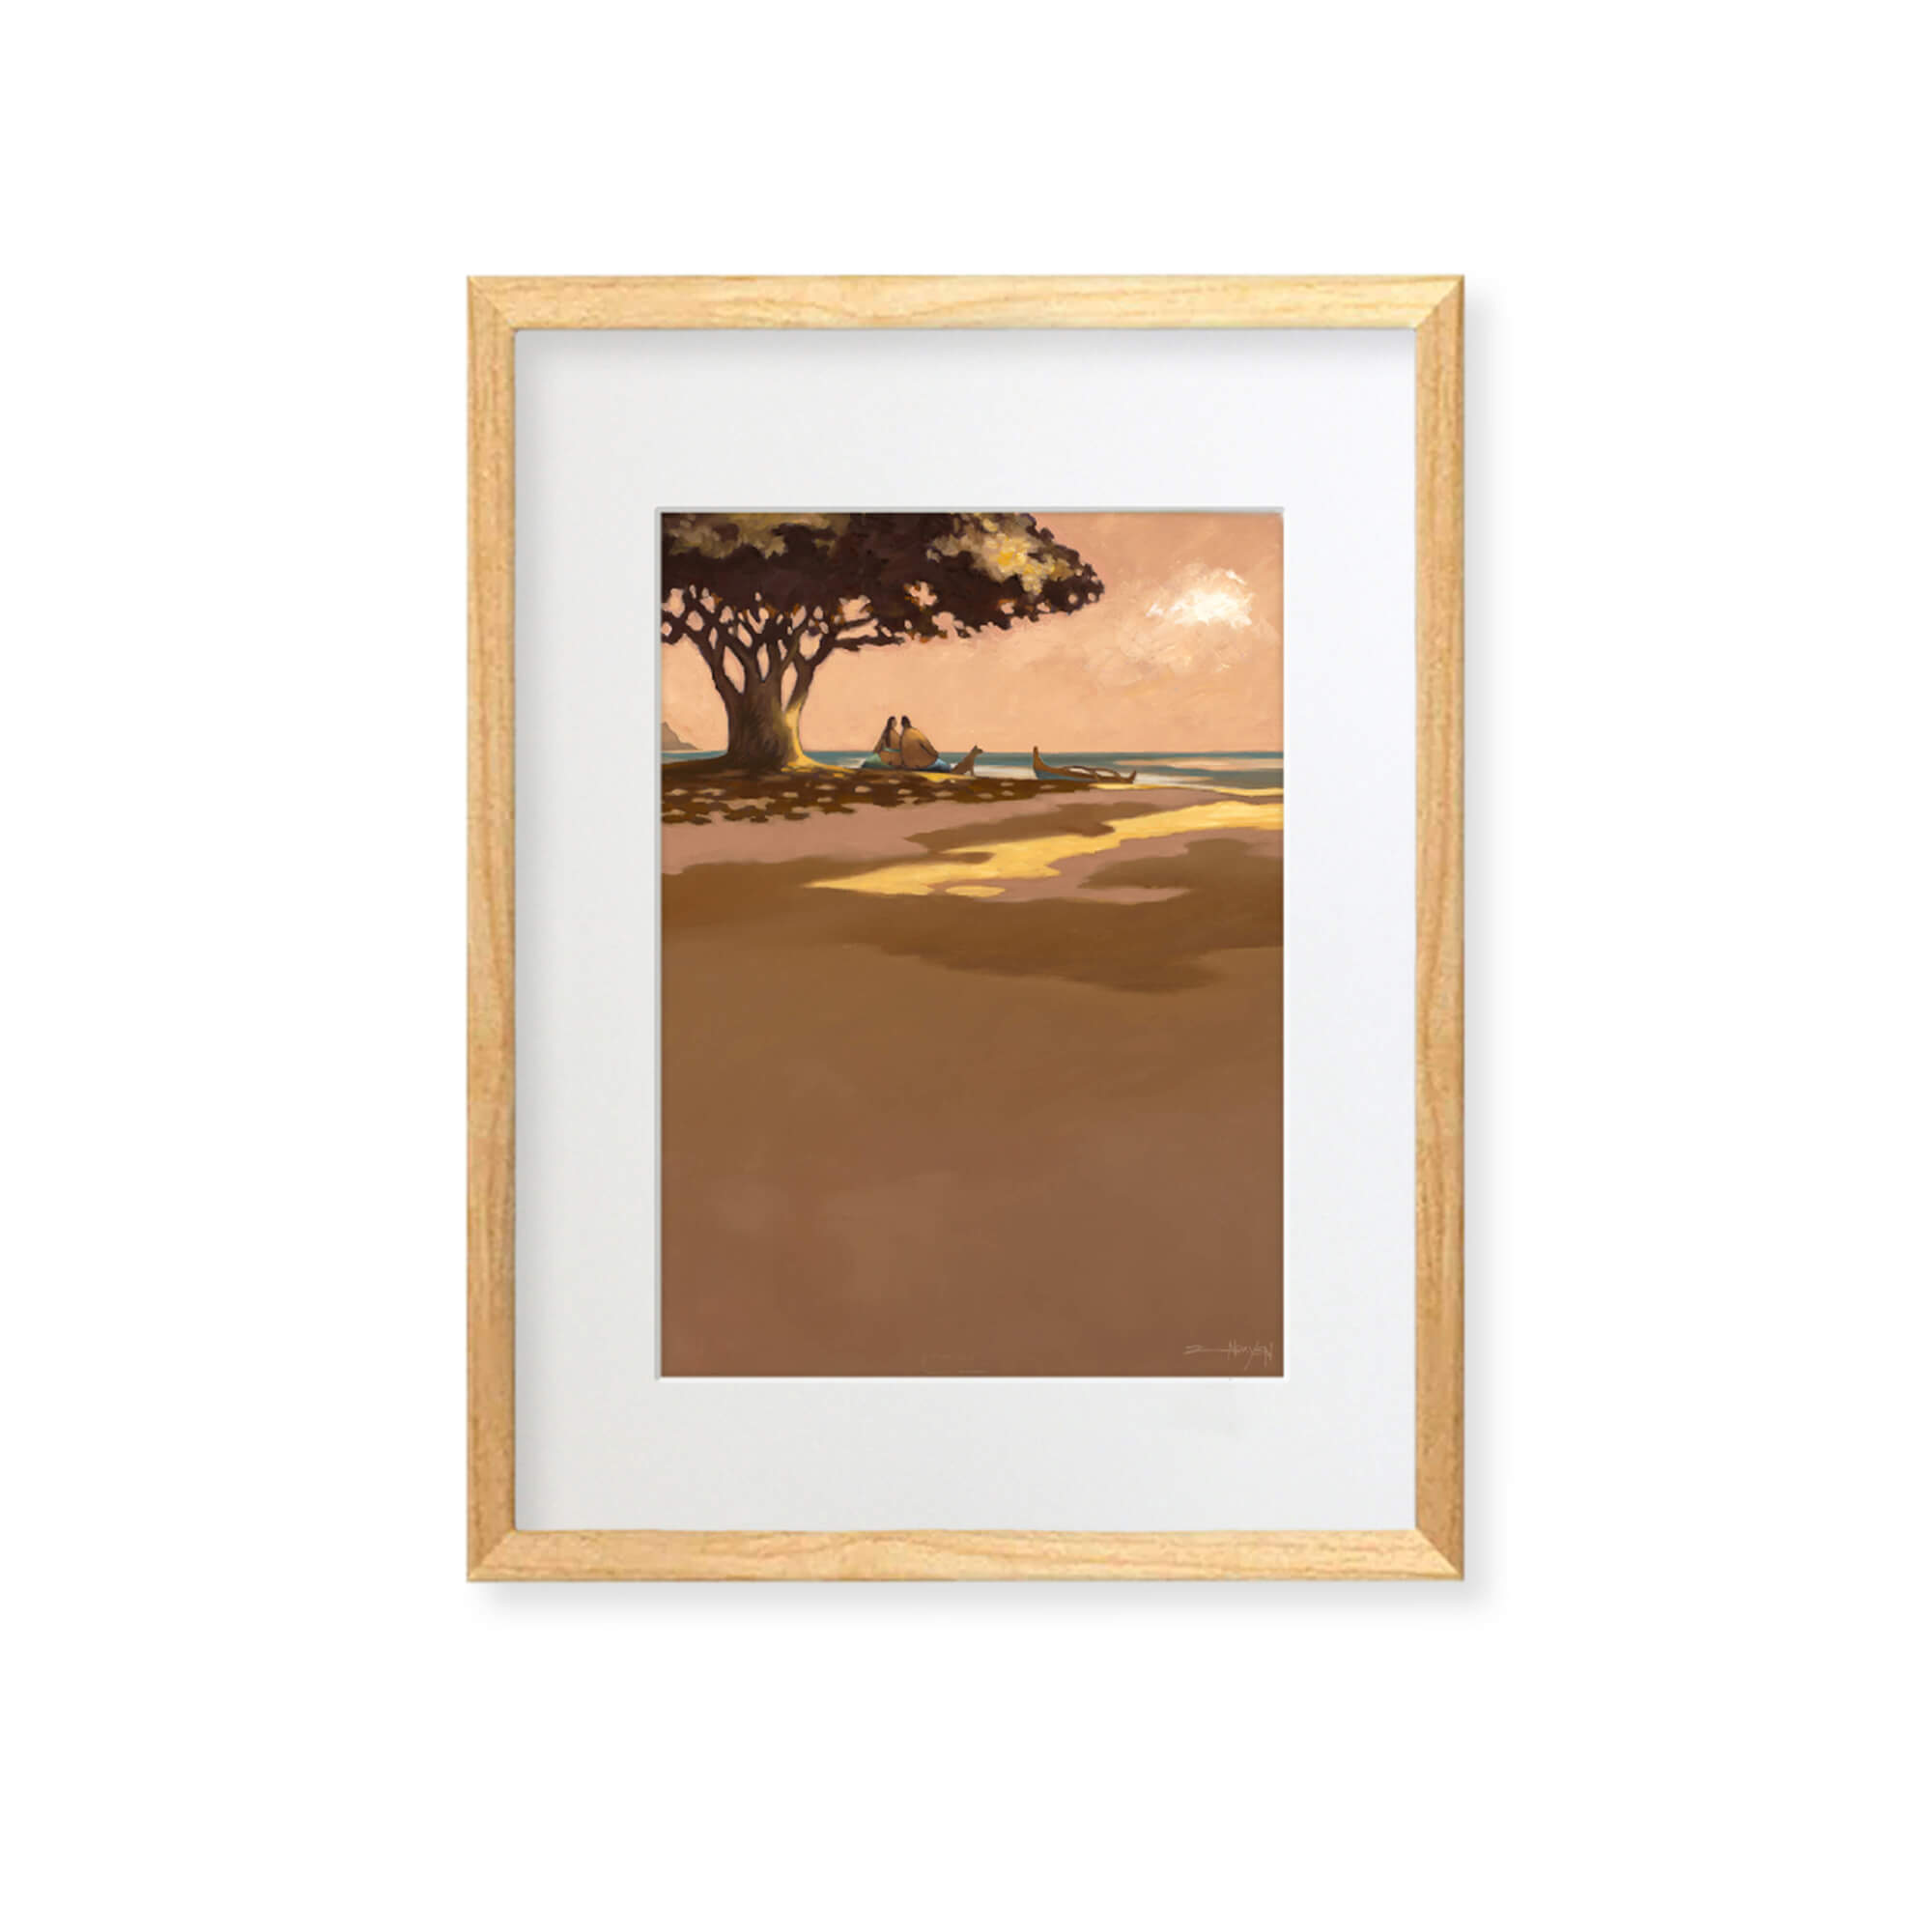 Framed matted art print of a couple and their dog enjoying a beautiful sunset view at the beach by Hawaii artist Tim Nguyen